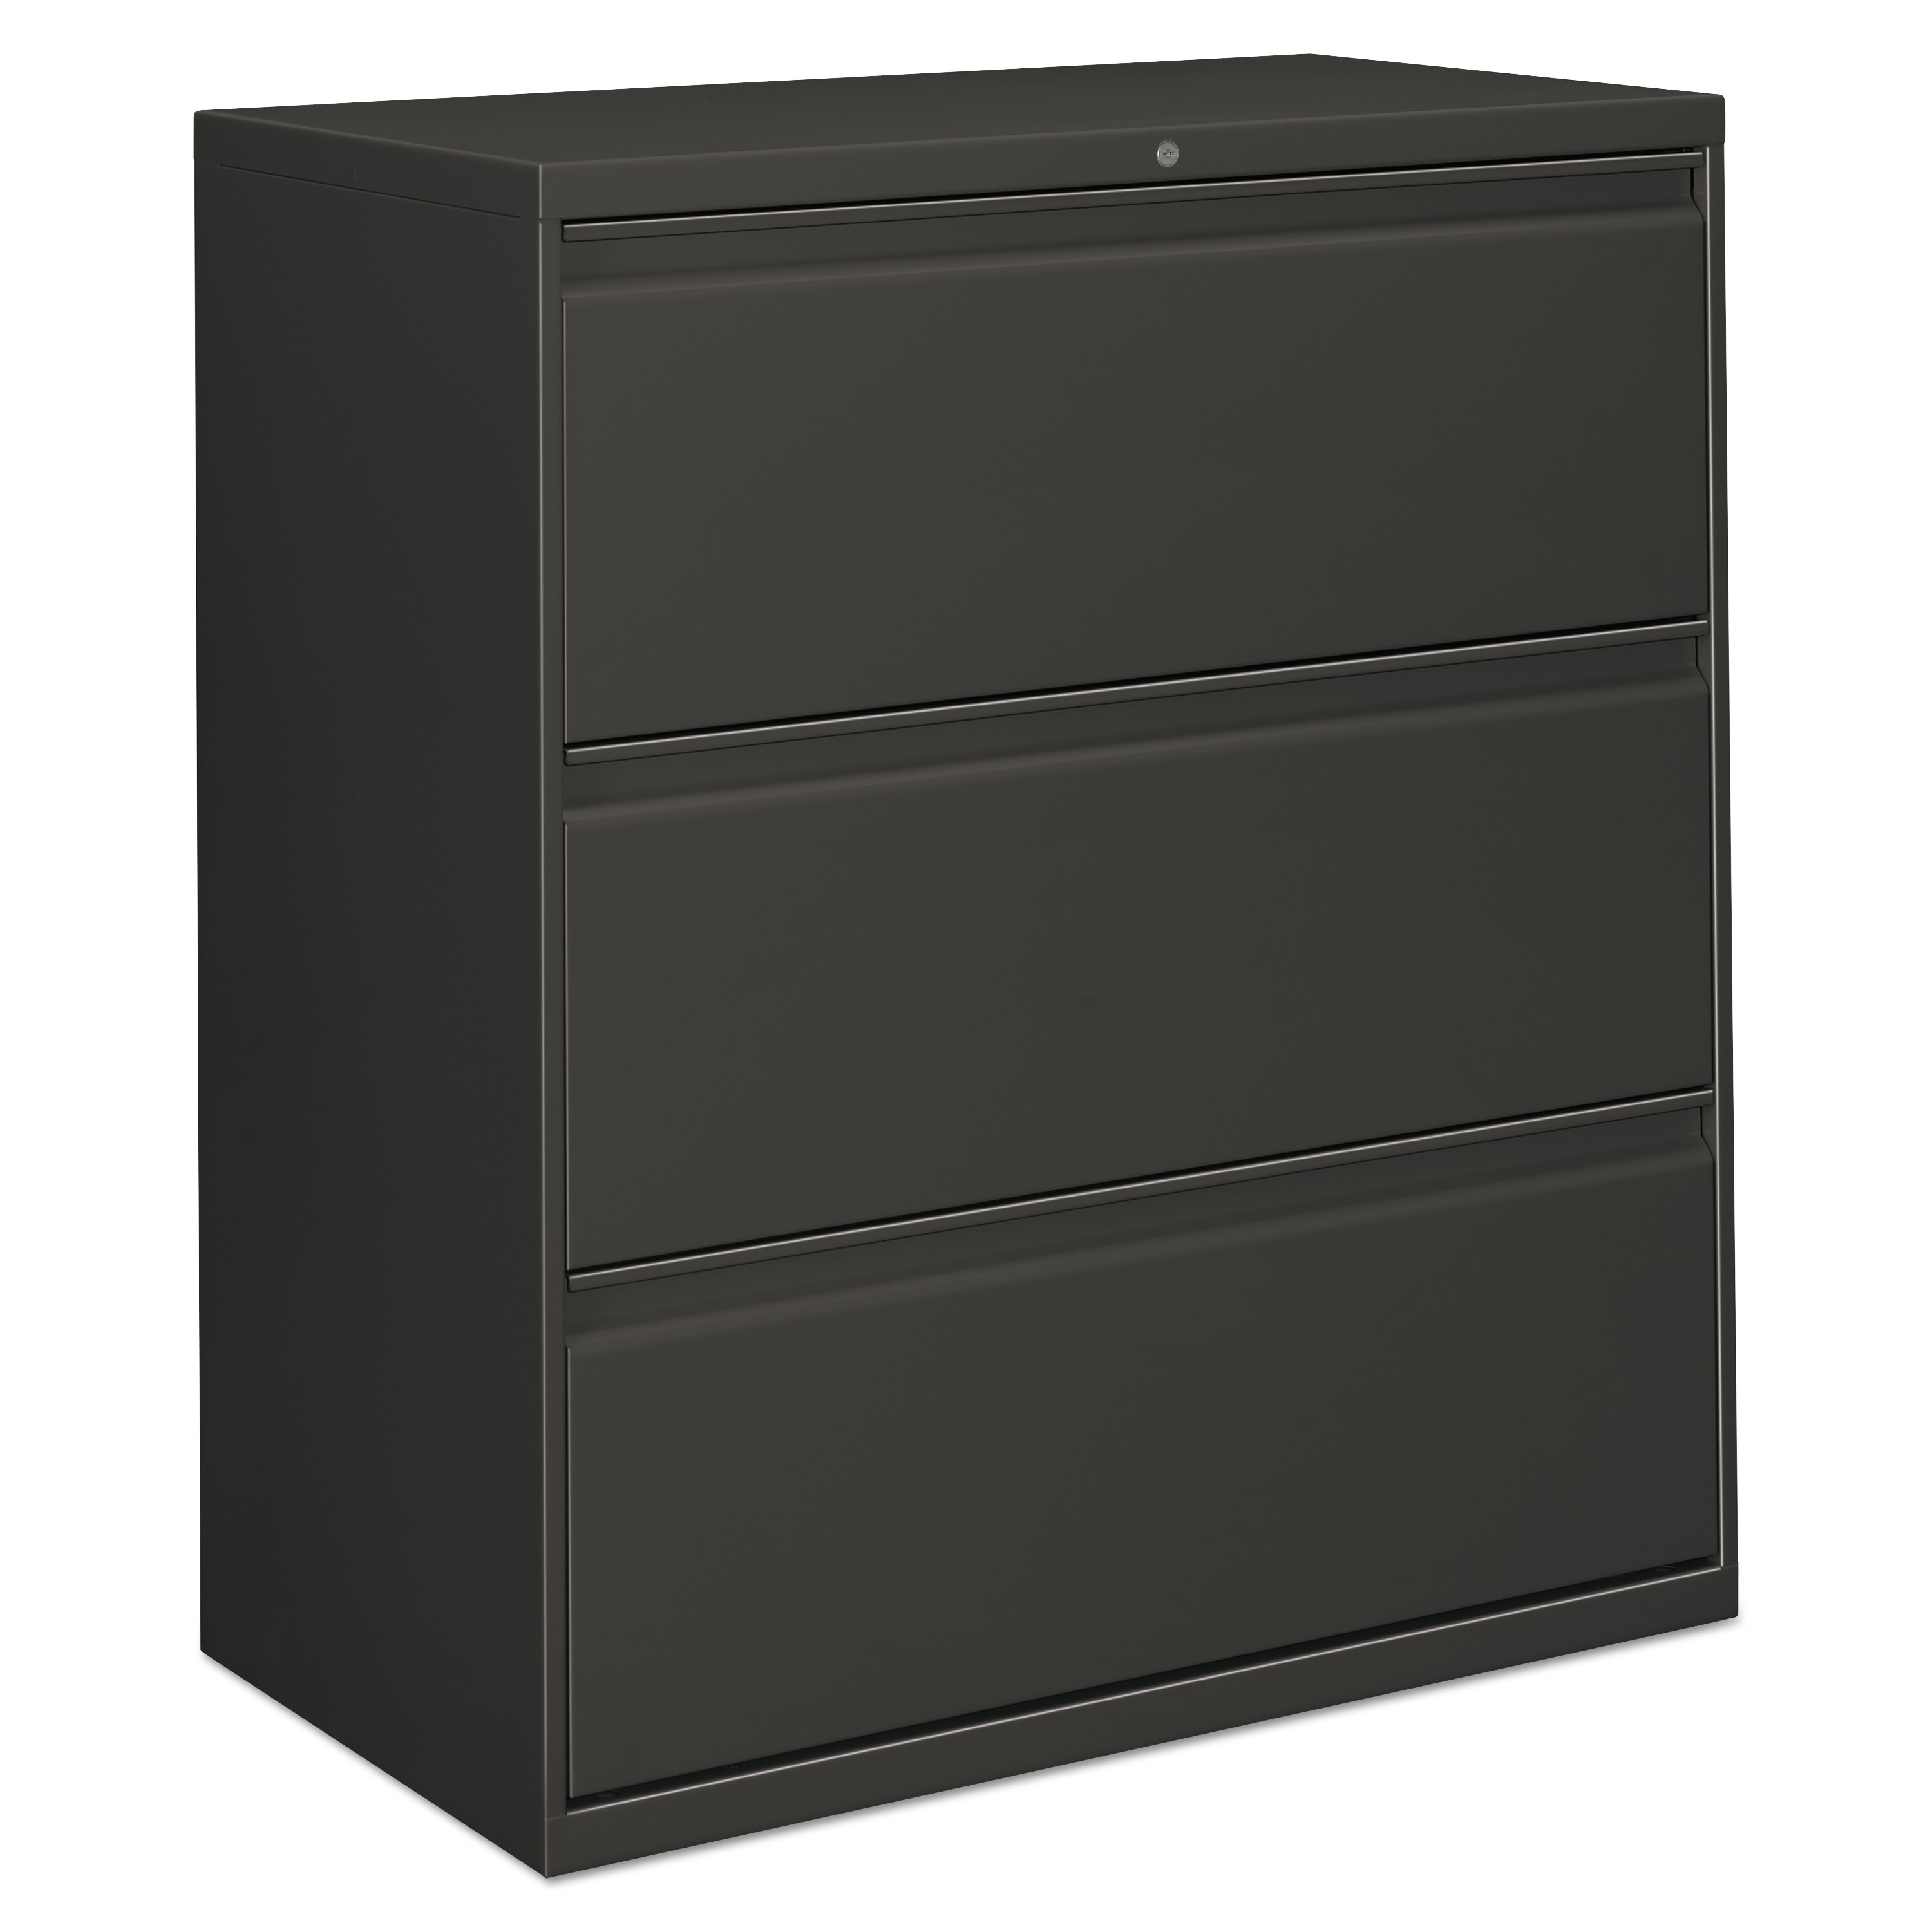 Three-Drawer Lateral File Cabinet, 36w x 18d x 39 1/2h, Charcoal